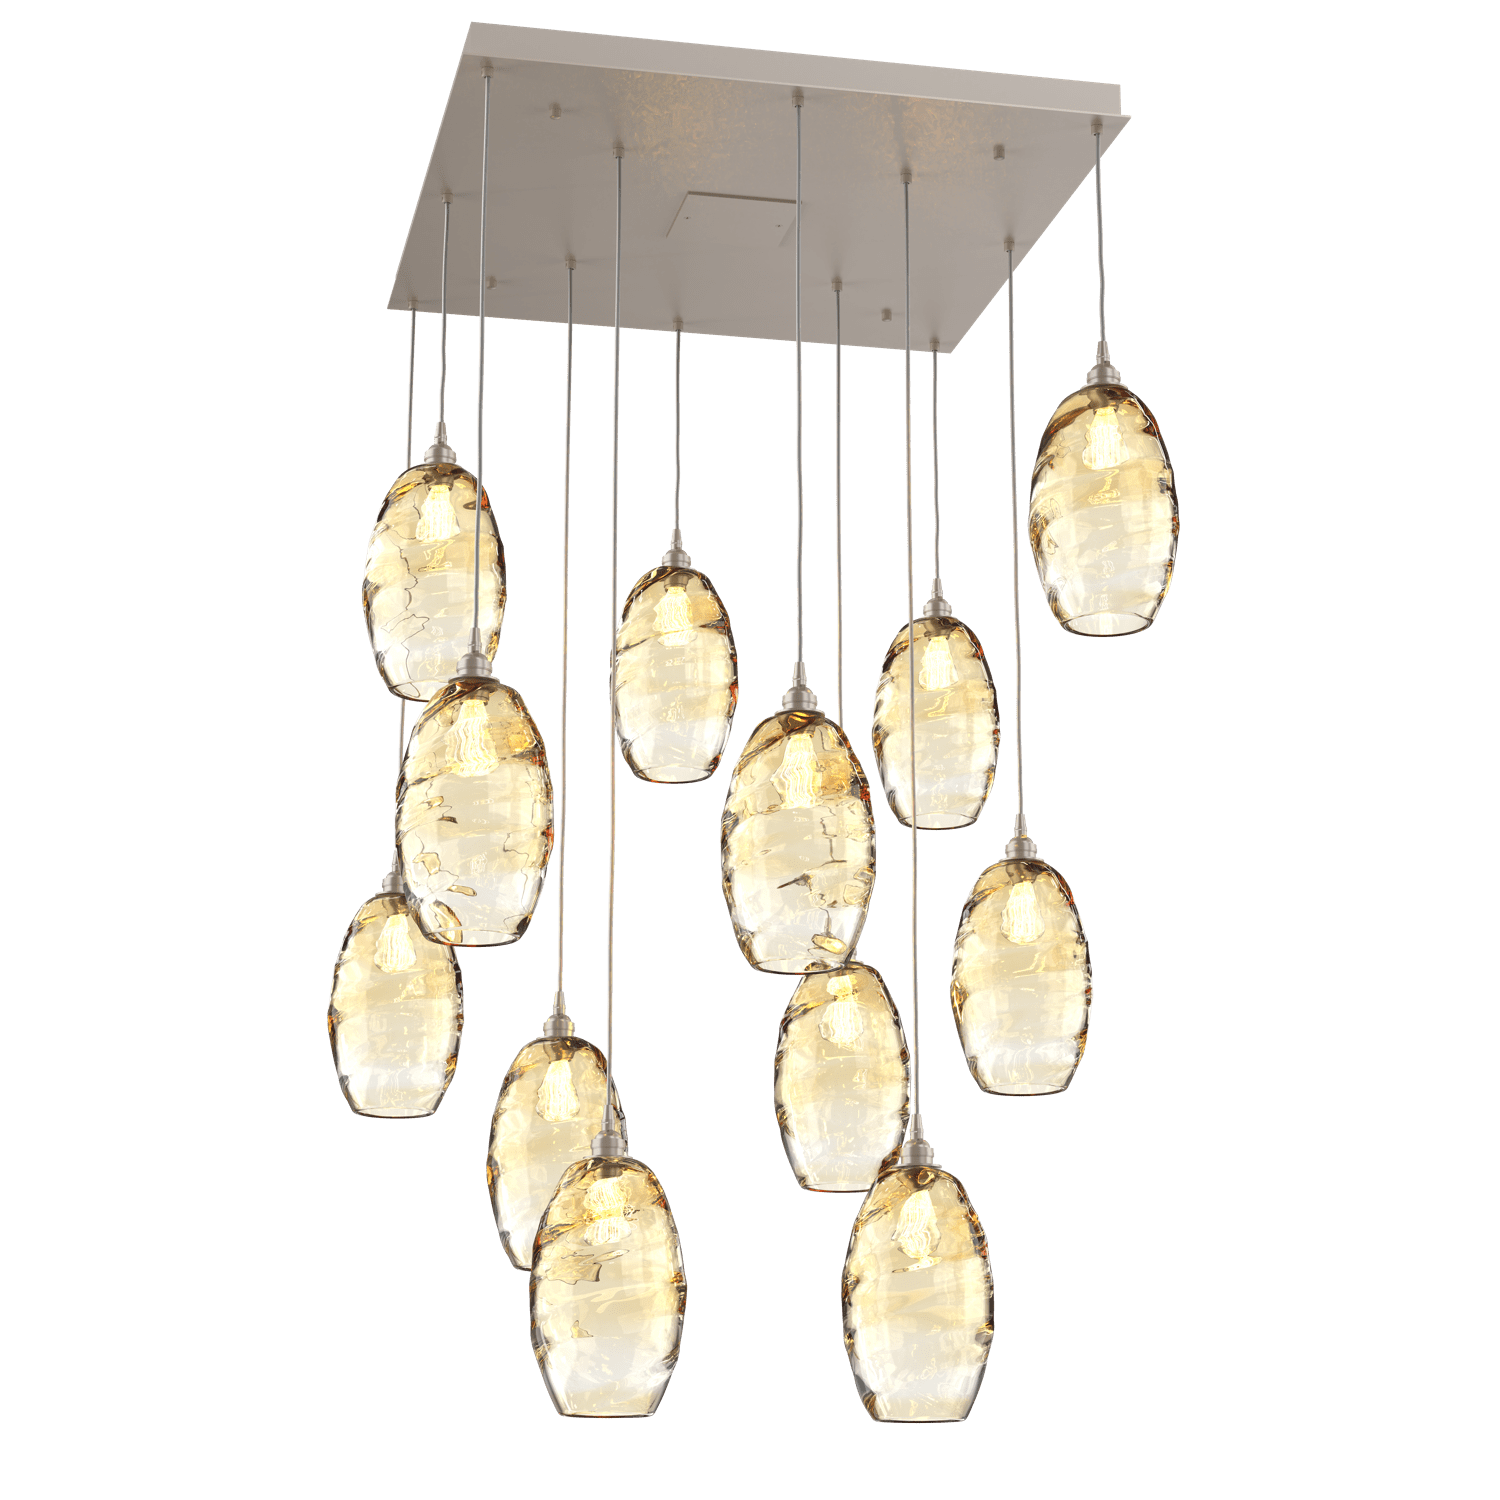 CHB0035-12-BS-OA-Hammerton-Studio-Optic-Blown-Glass-Elisse-12-light-square-pendant-chandelier-with-metallic-beige-silver-finish-and-optic-amber-blown-glass-shades-and-incandescent-lamping